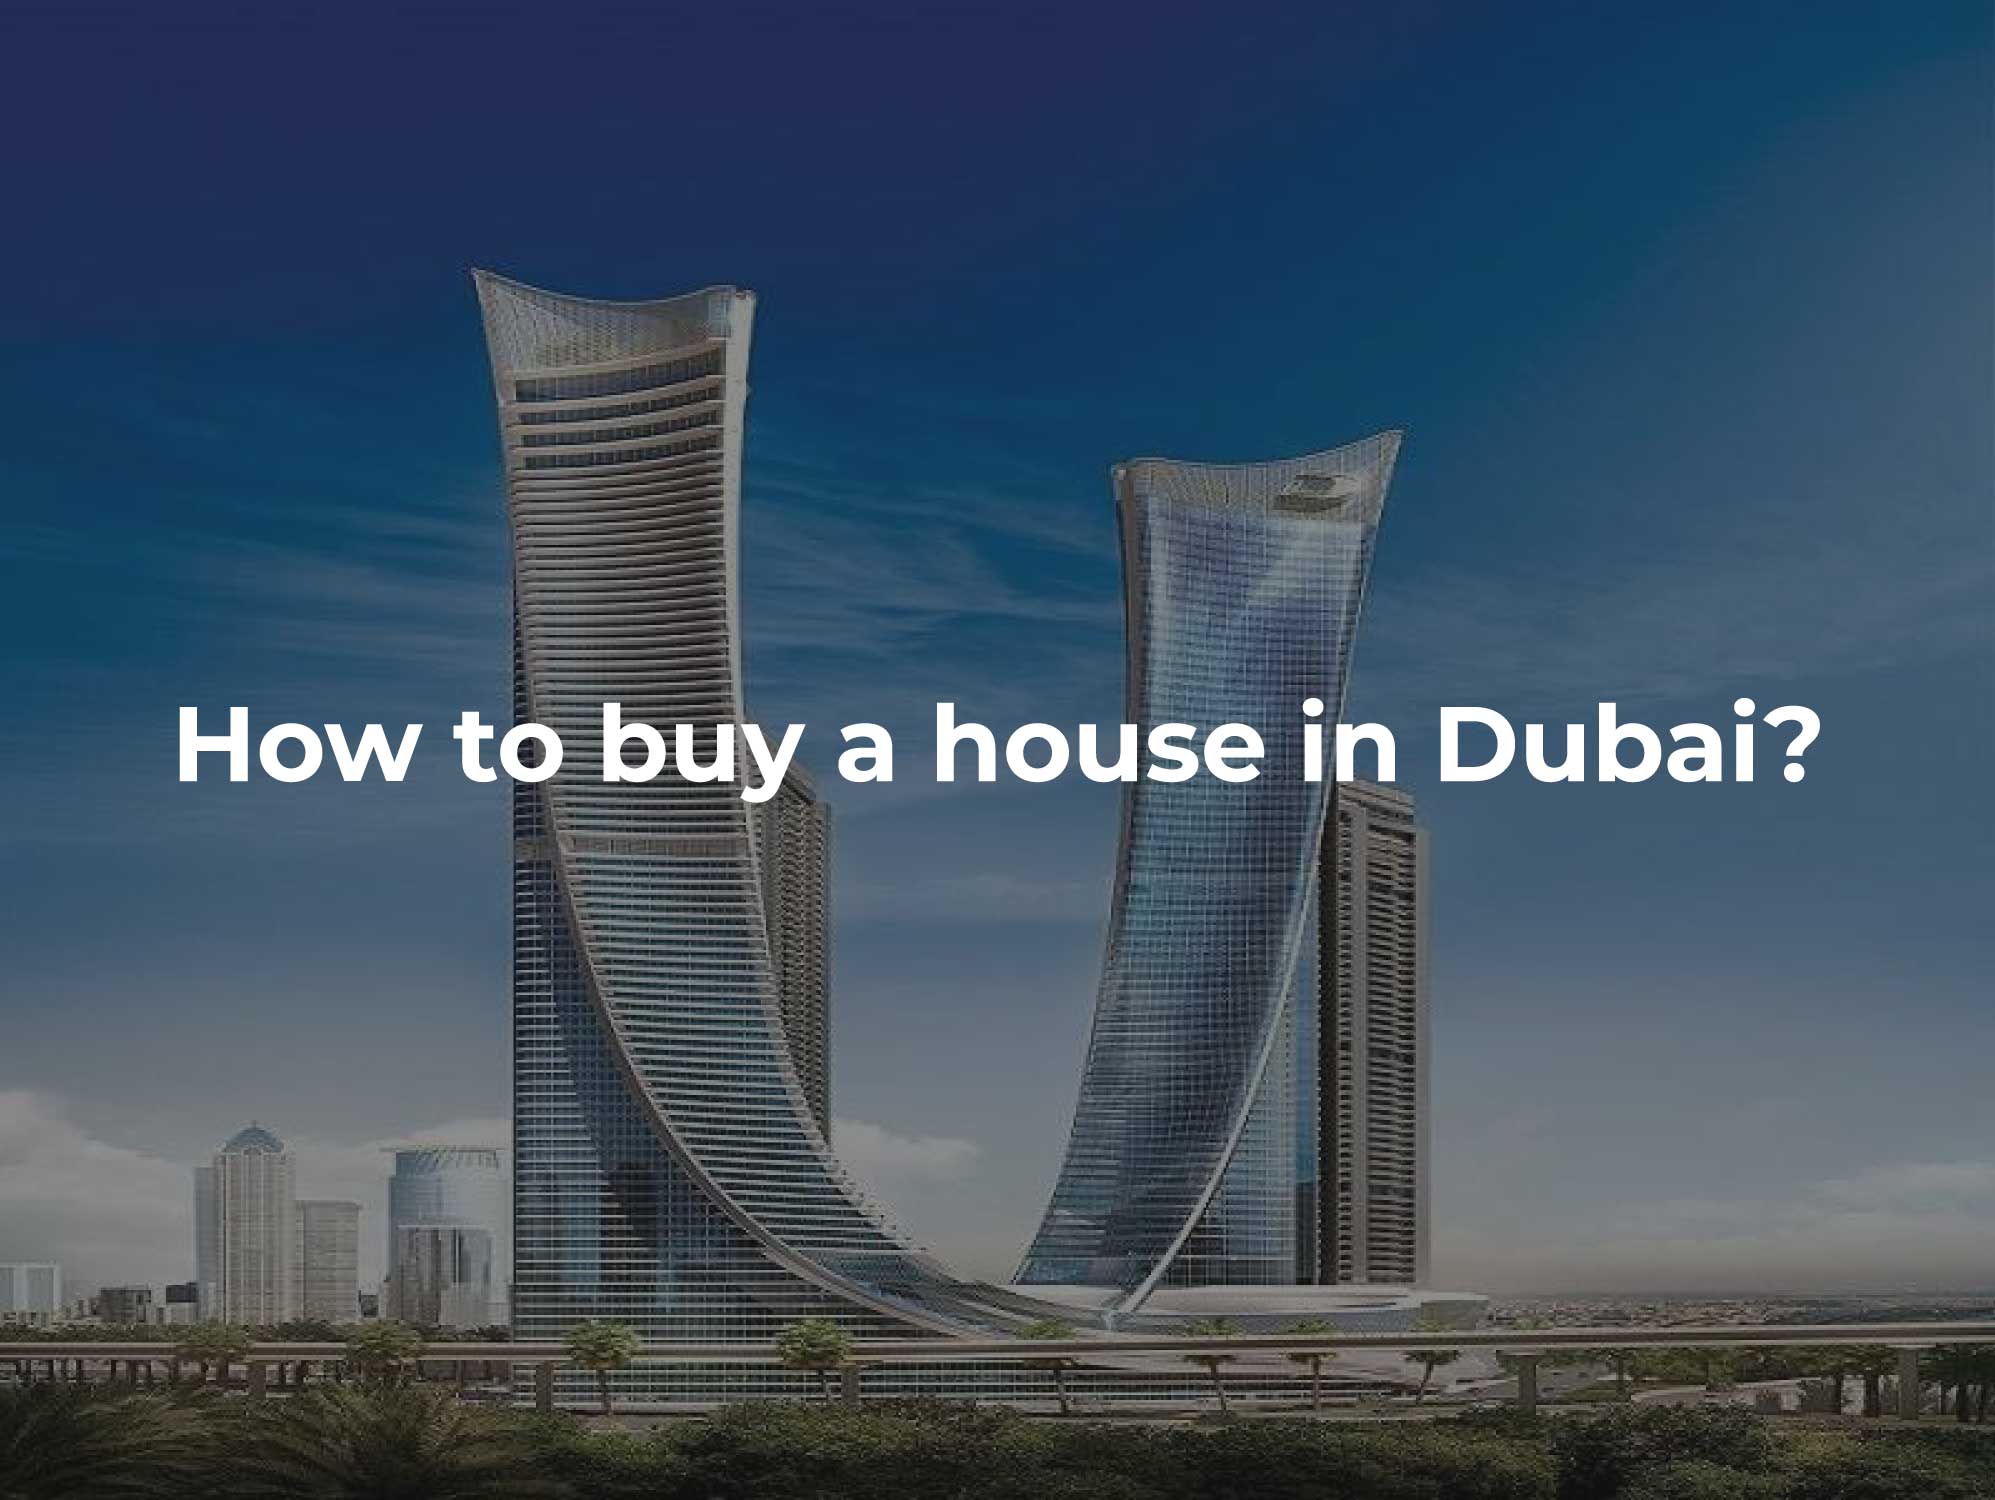 How to buy a house in Dubai?